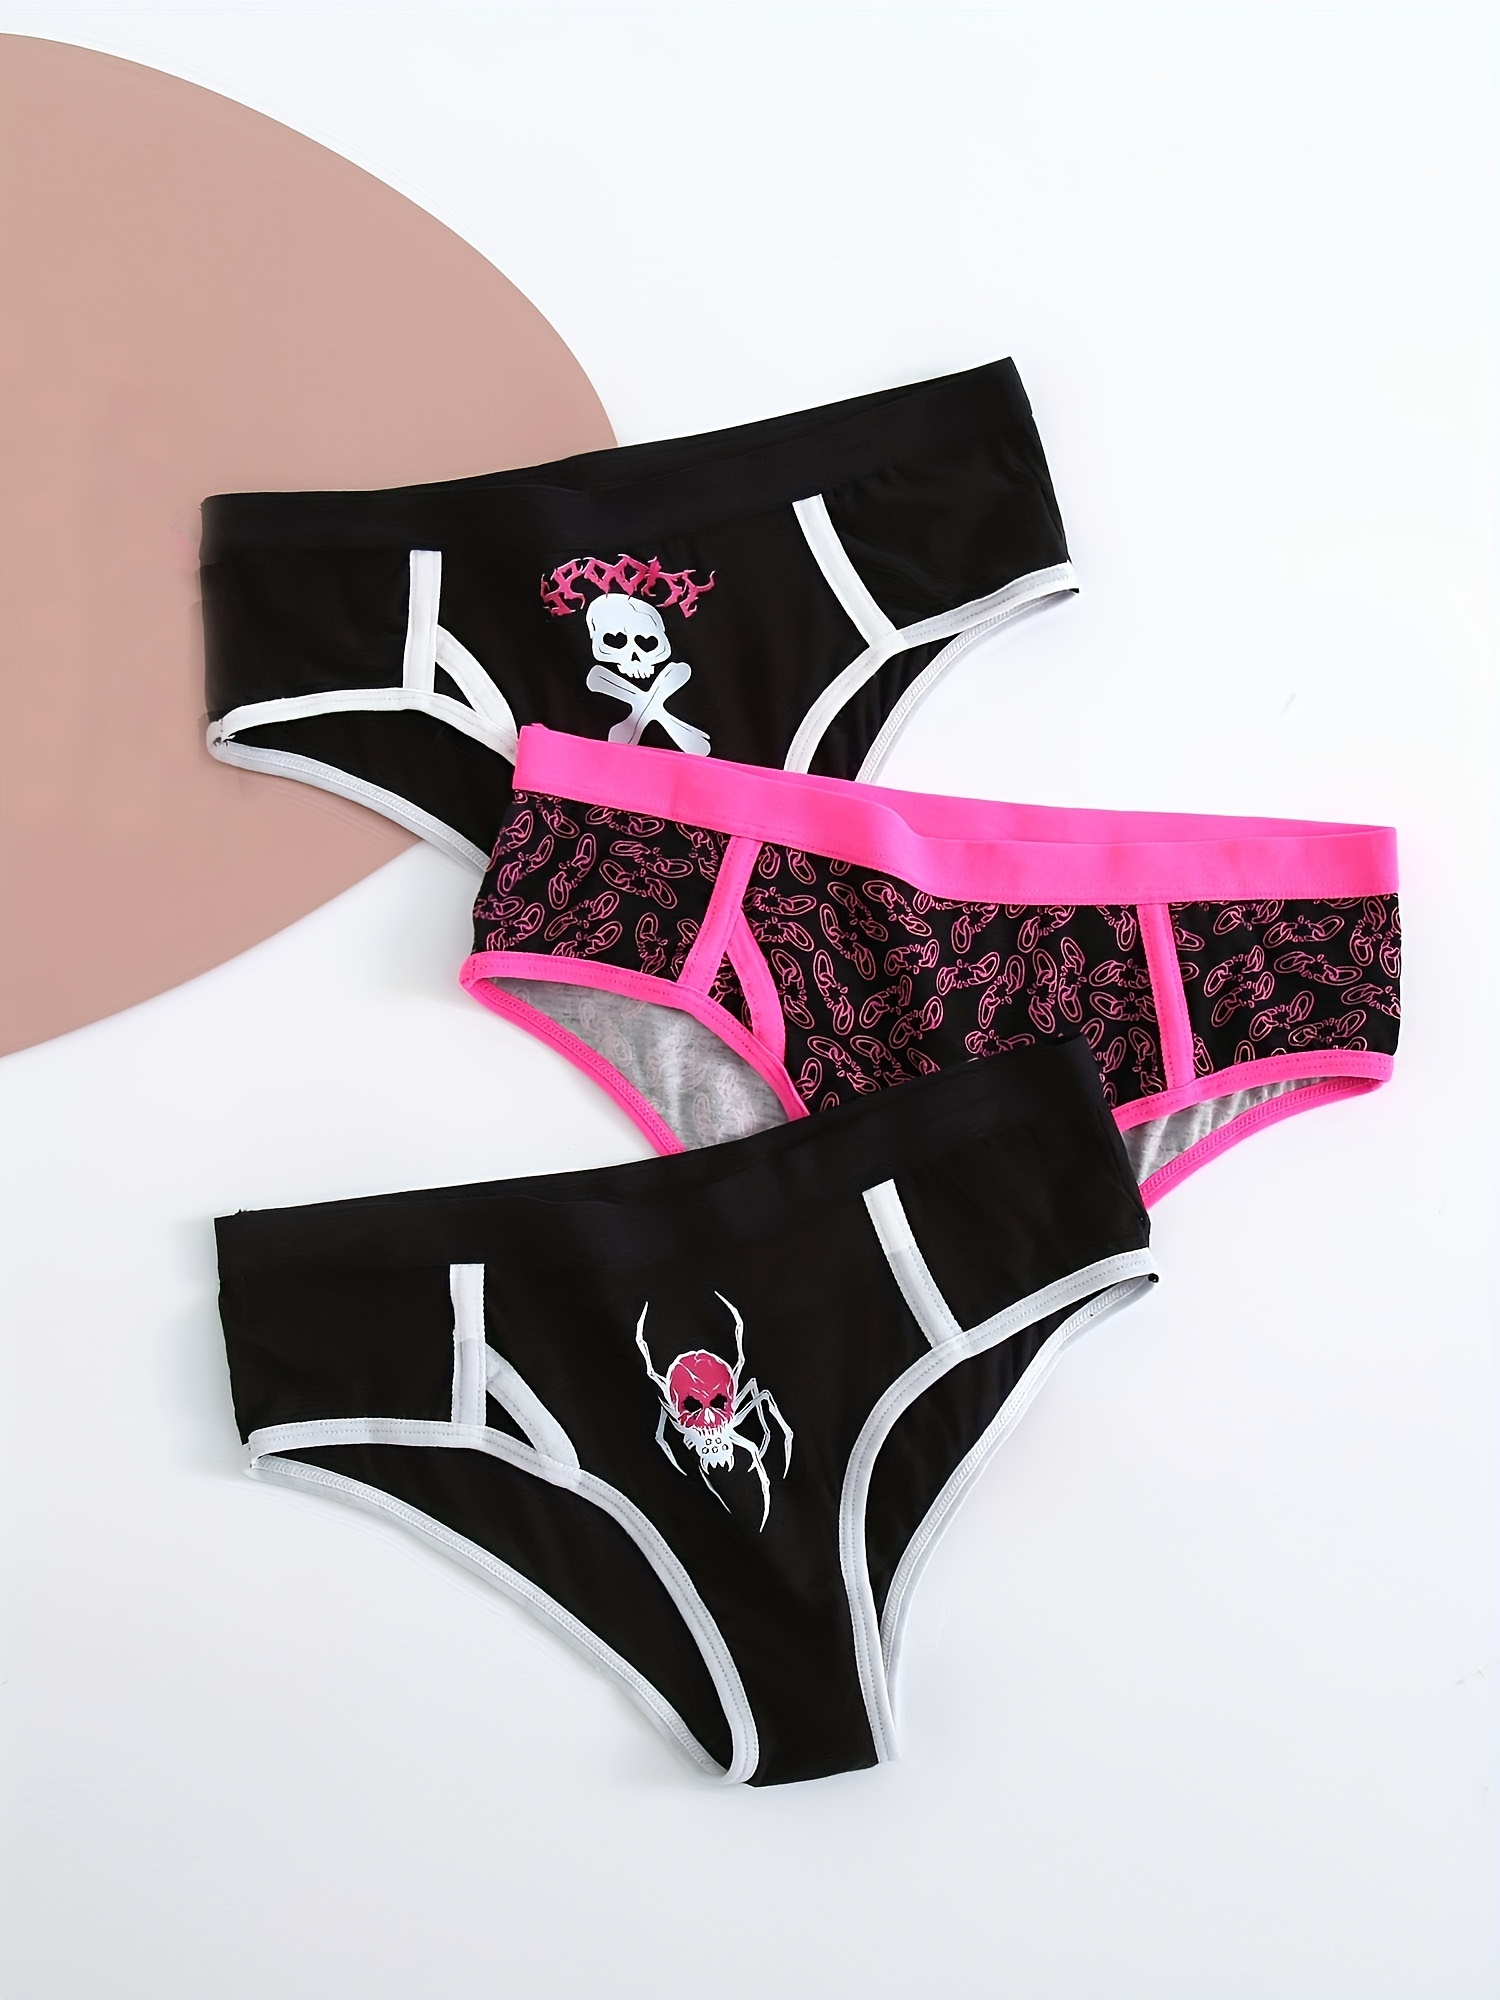 Sexy Skull Print Printed Panty DeanFire 92% Polyester & 8% Spandex